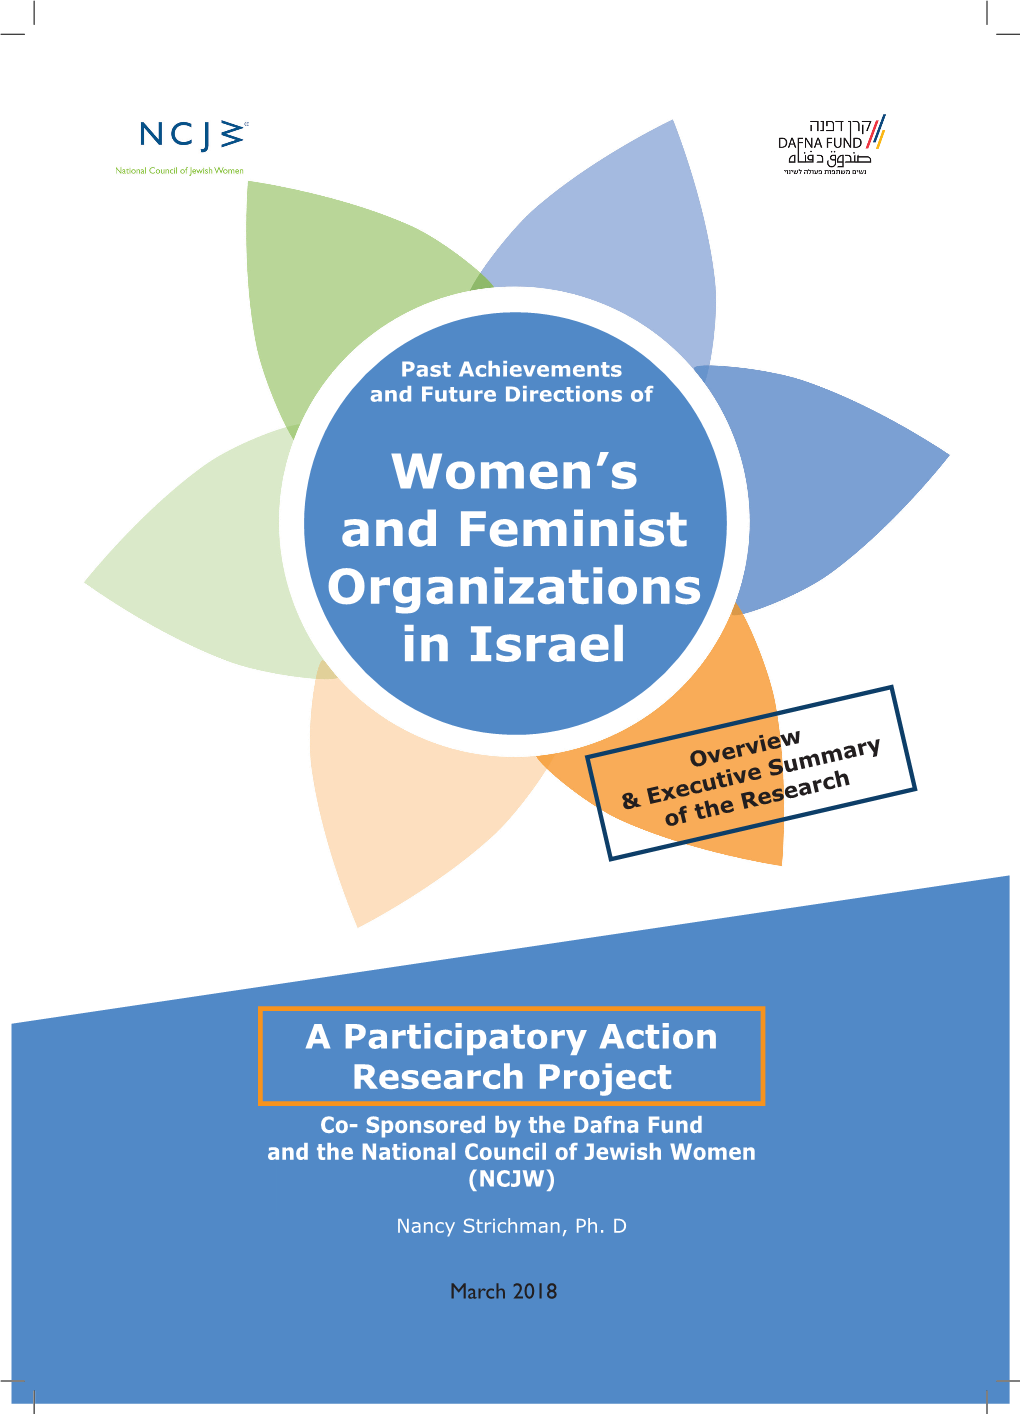 Women's and Feminist Organizations in Israel